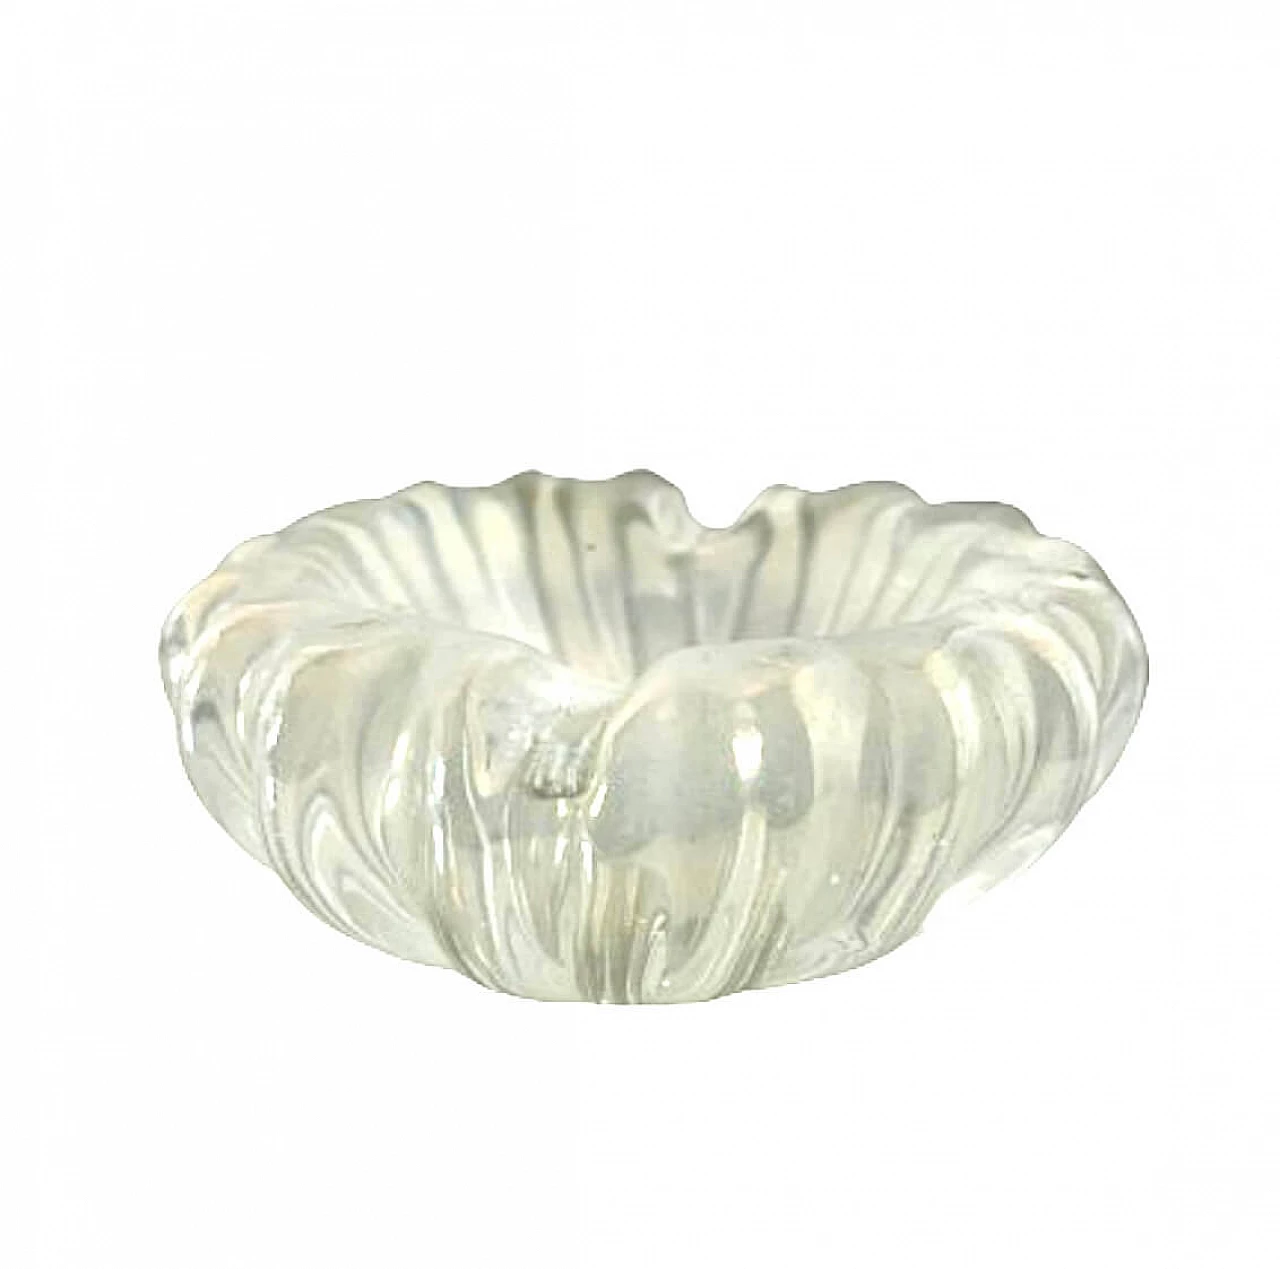 Opalescent glass bowl by Barovier, 1940s 1